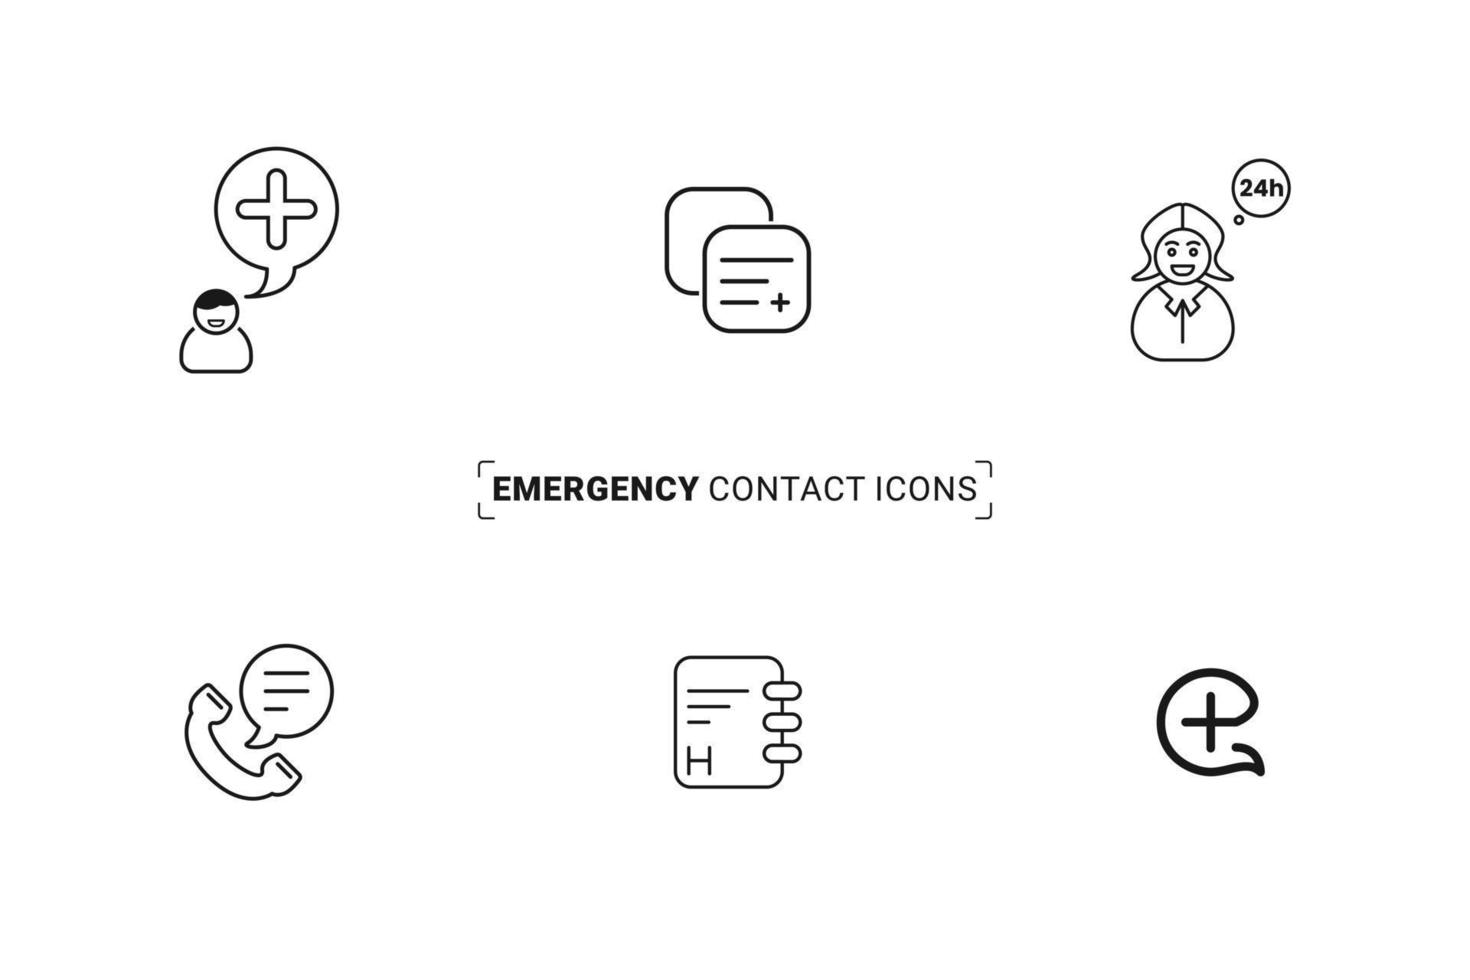 Clinic contact icons set for web and print use. For Businesses and medical purposes. vector